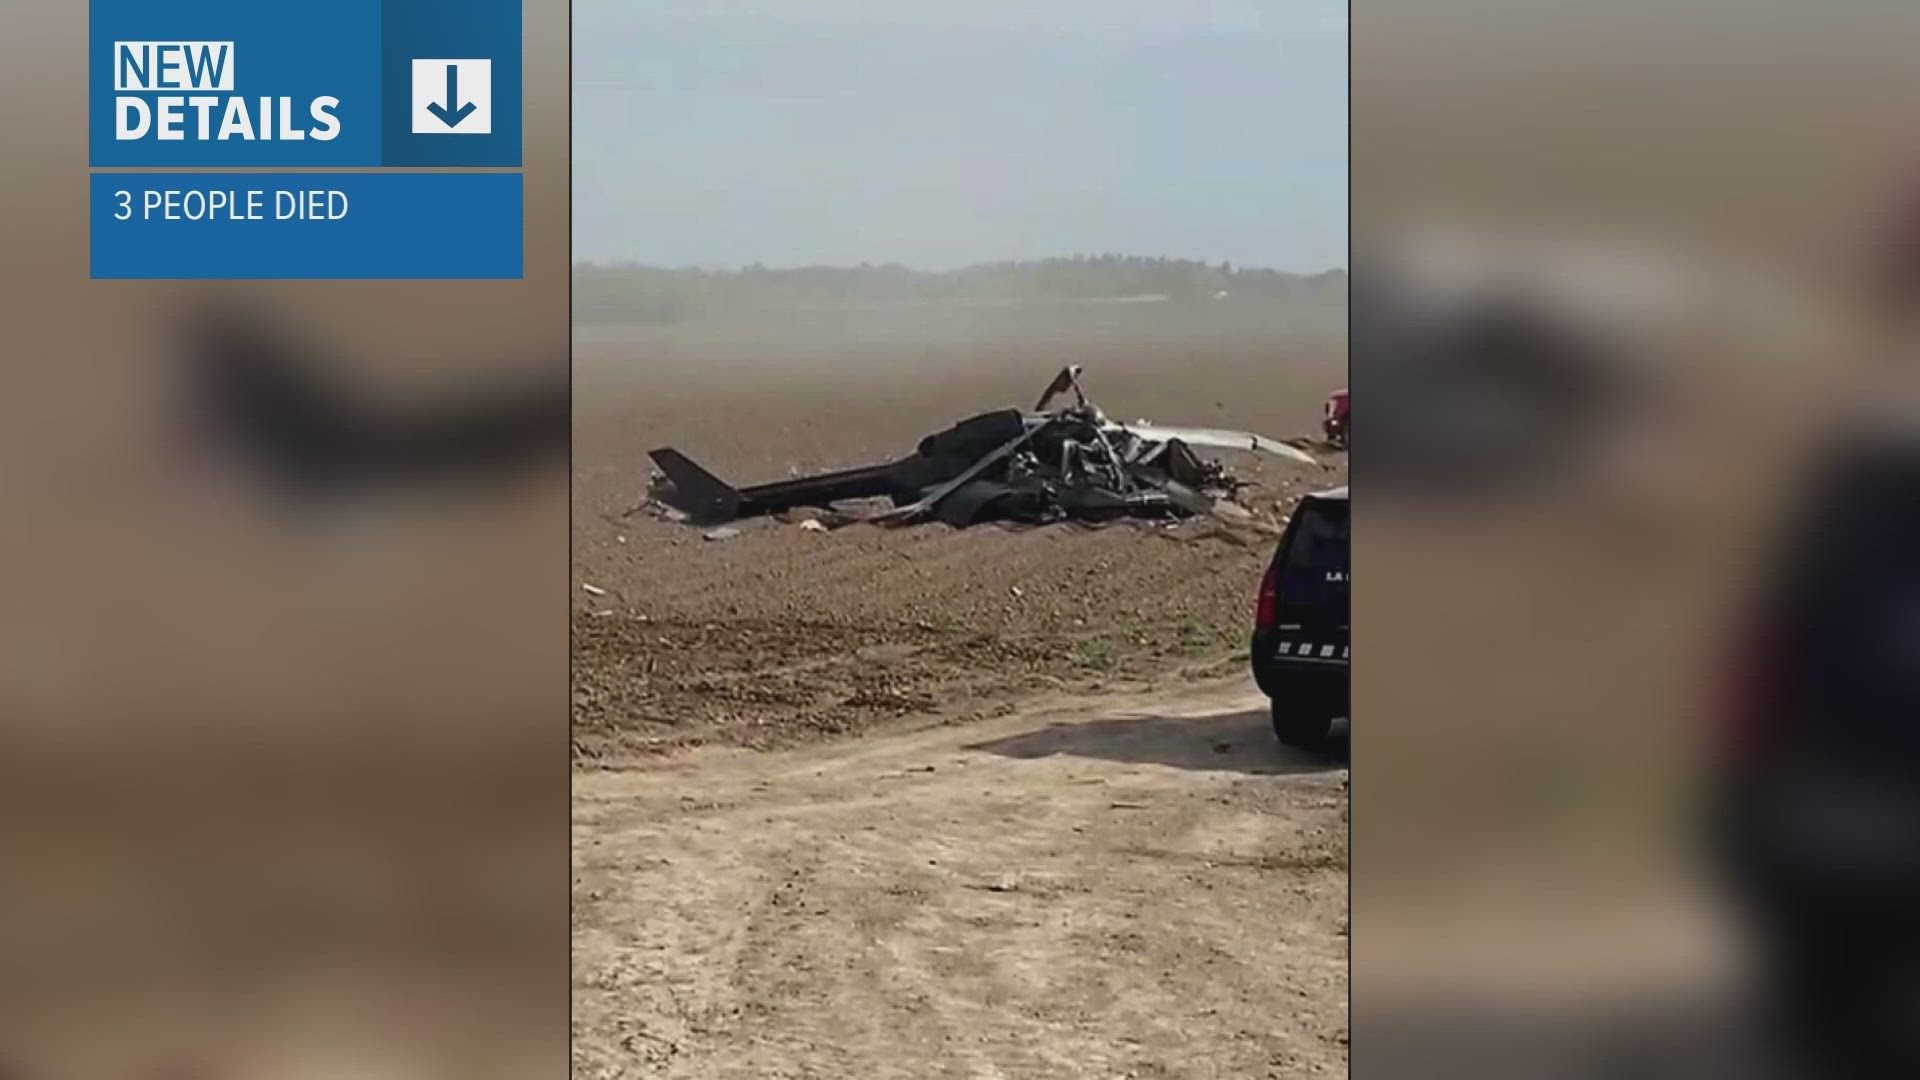 Officials say the two National Guard members and a U.S. Border Patrol agent died in a crash near the U.S.-Mexico border on Friday.